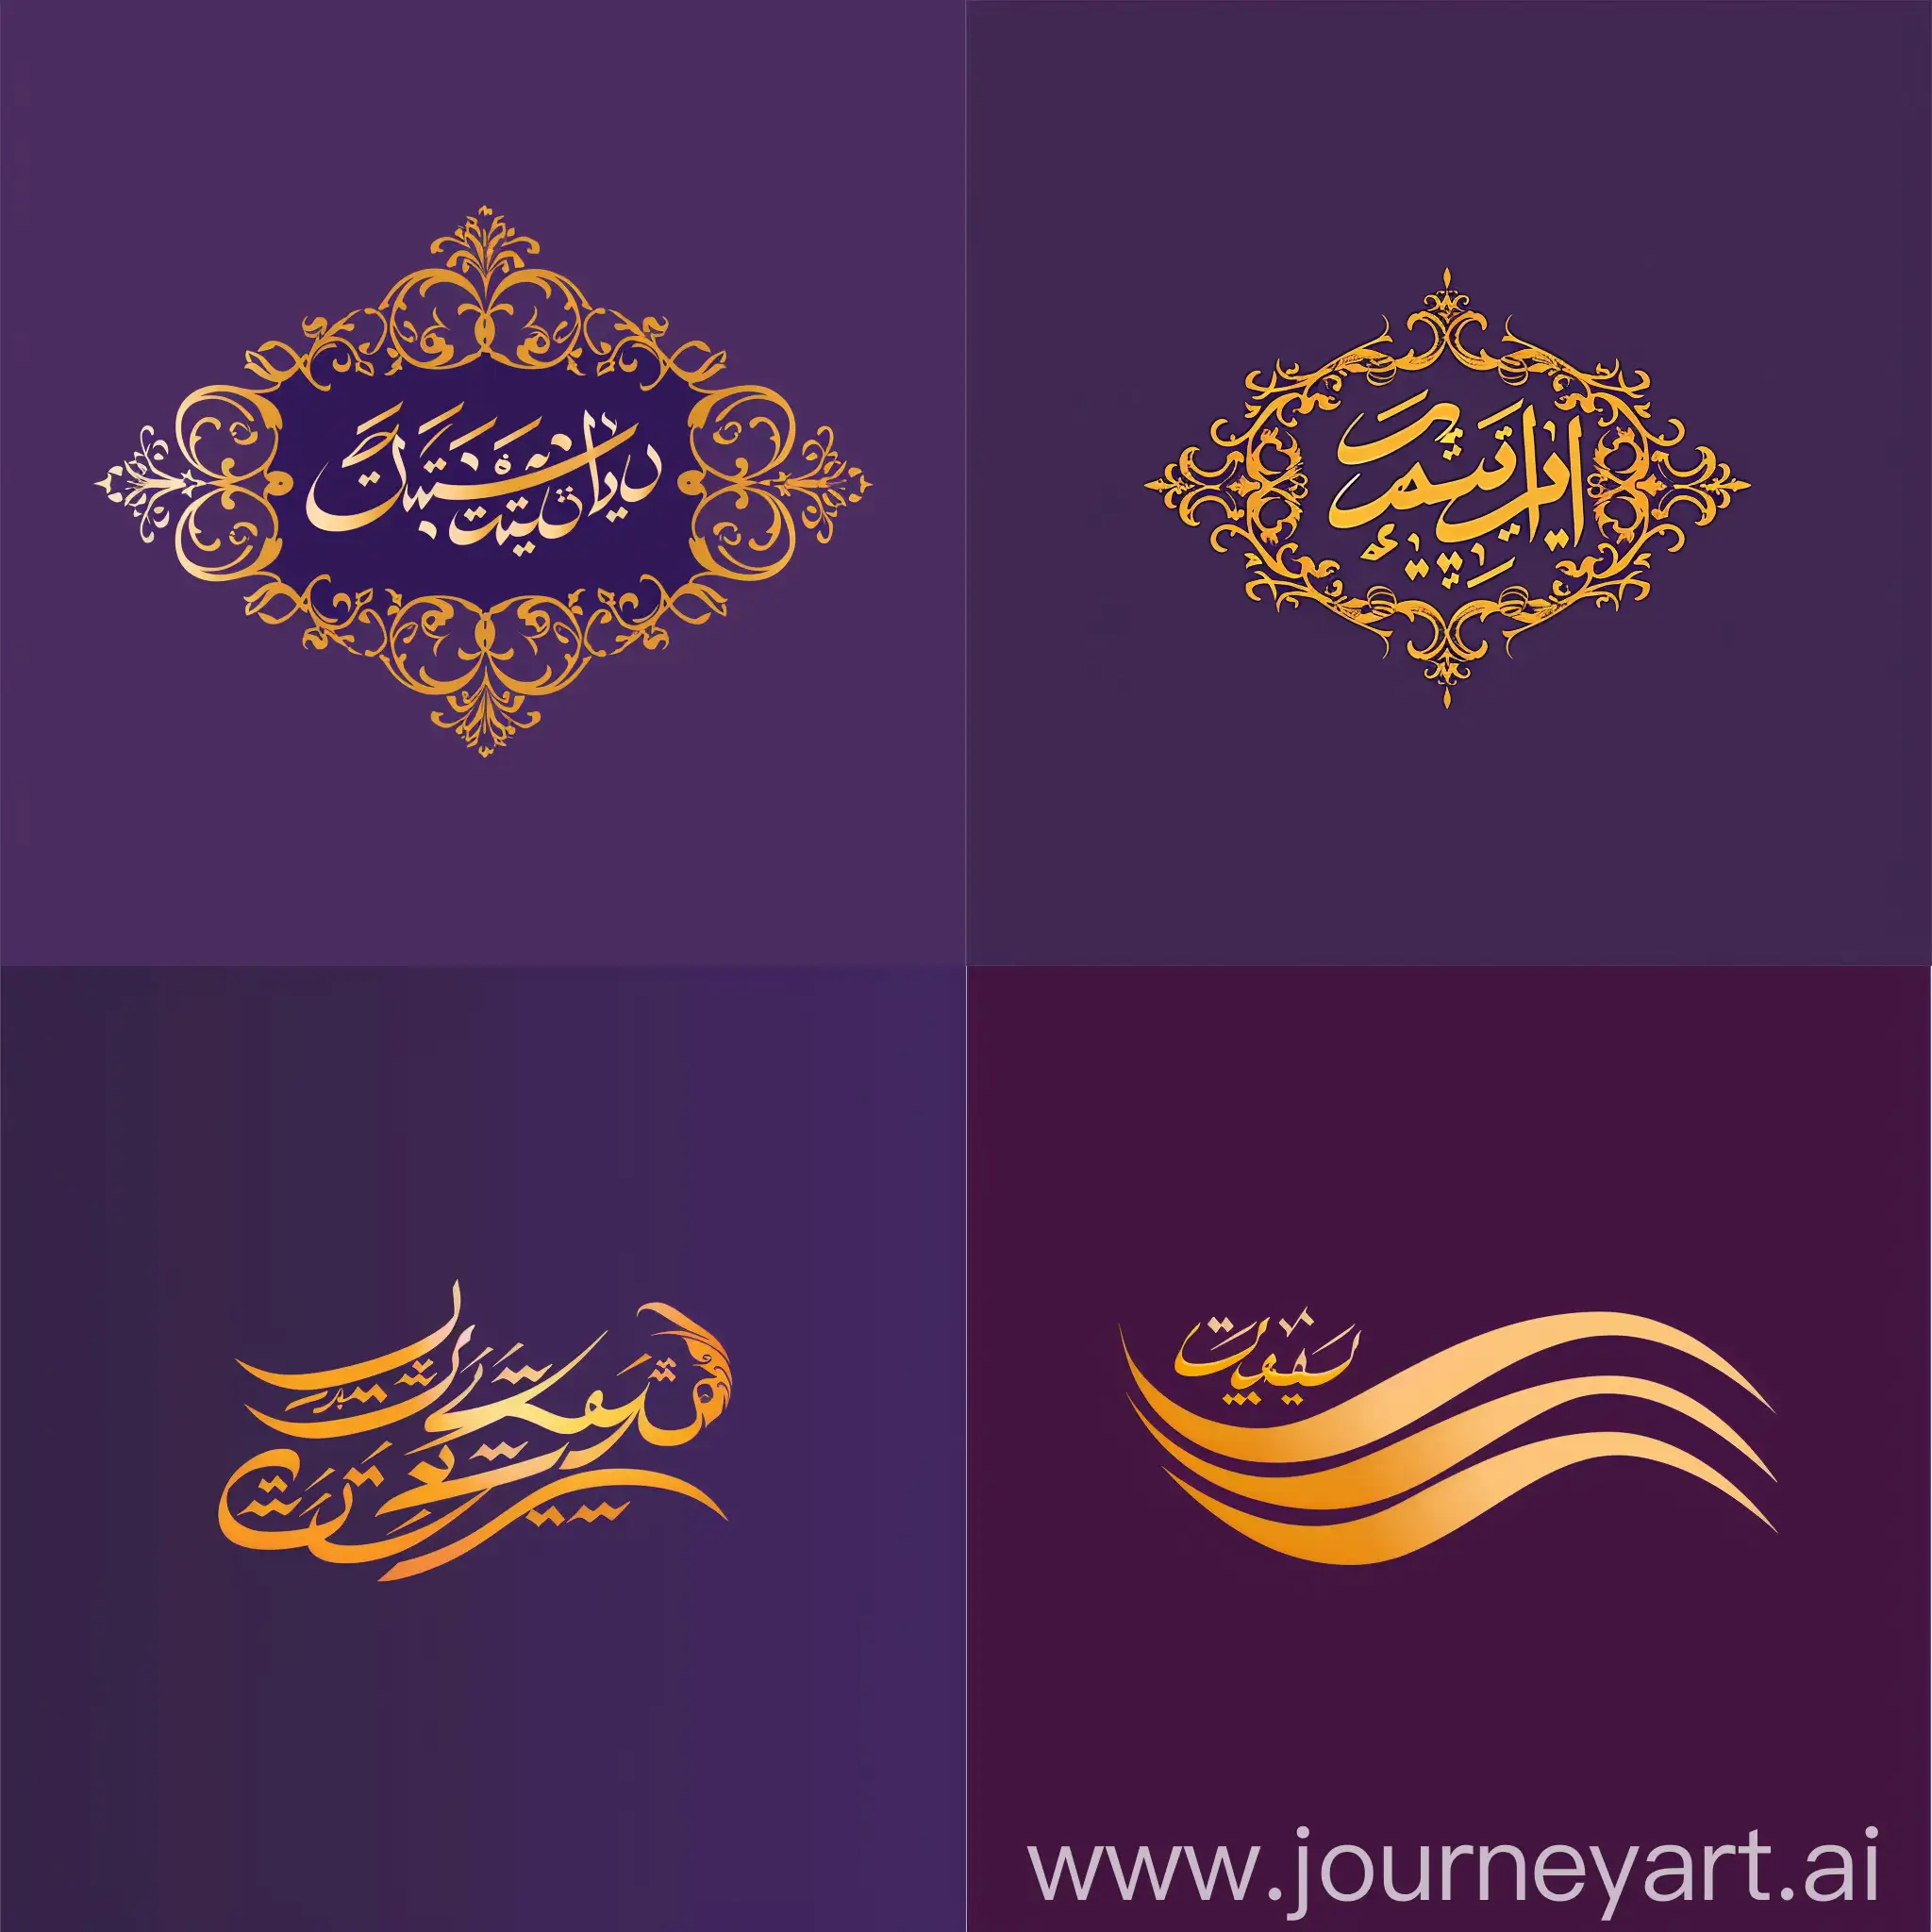 Logo Design With the following text in persian, golden color with purple background: ‌